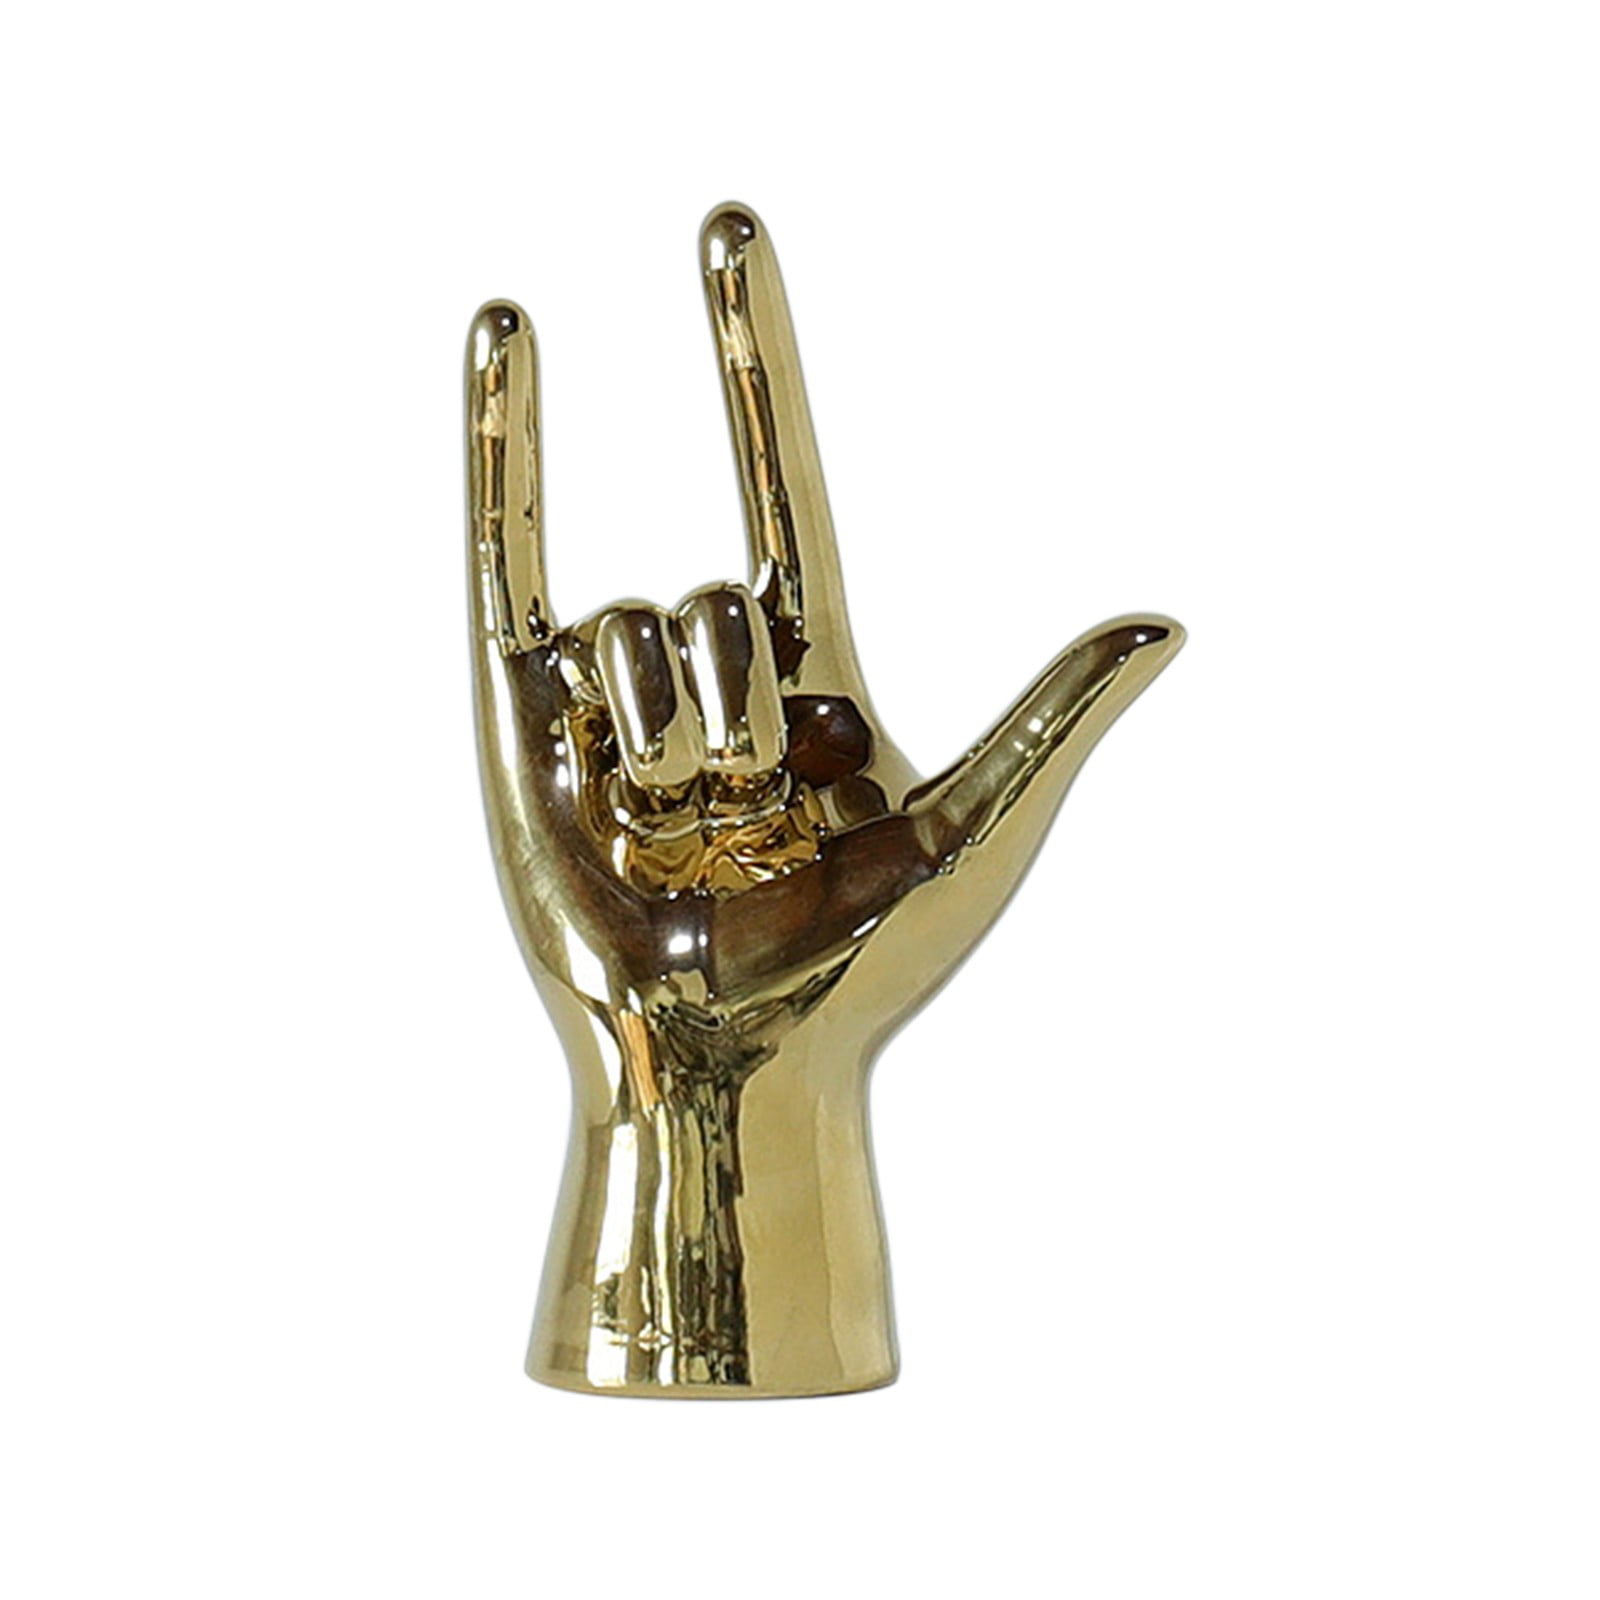 TAIAOJING Finger Sculpture Table Ornaments OK Gesture Sculpture Resin ...